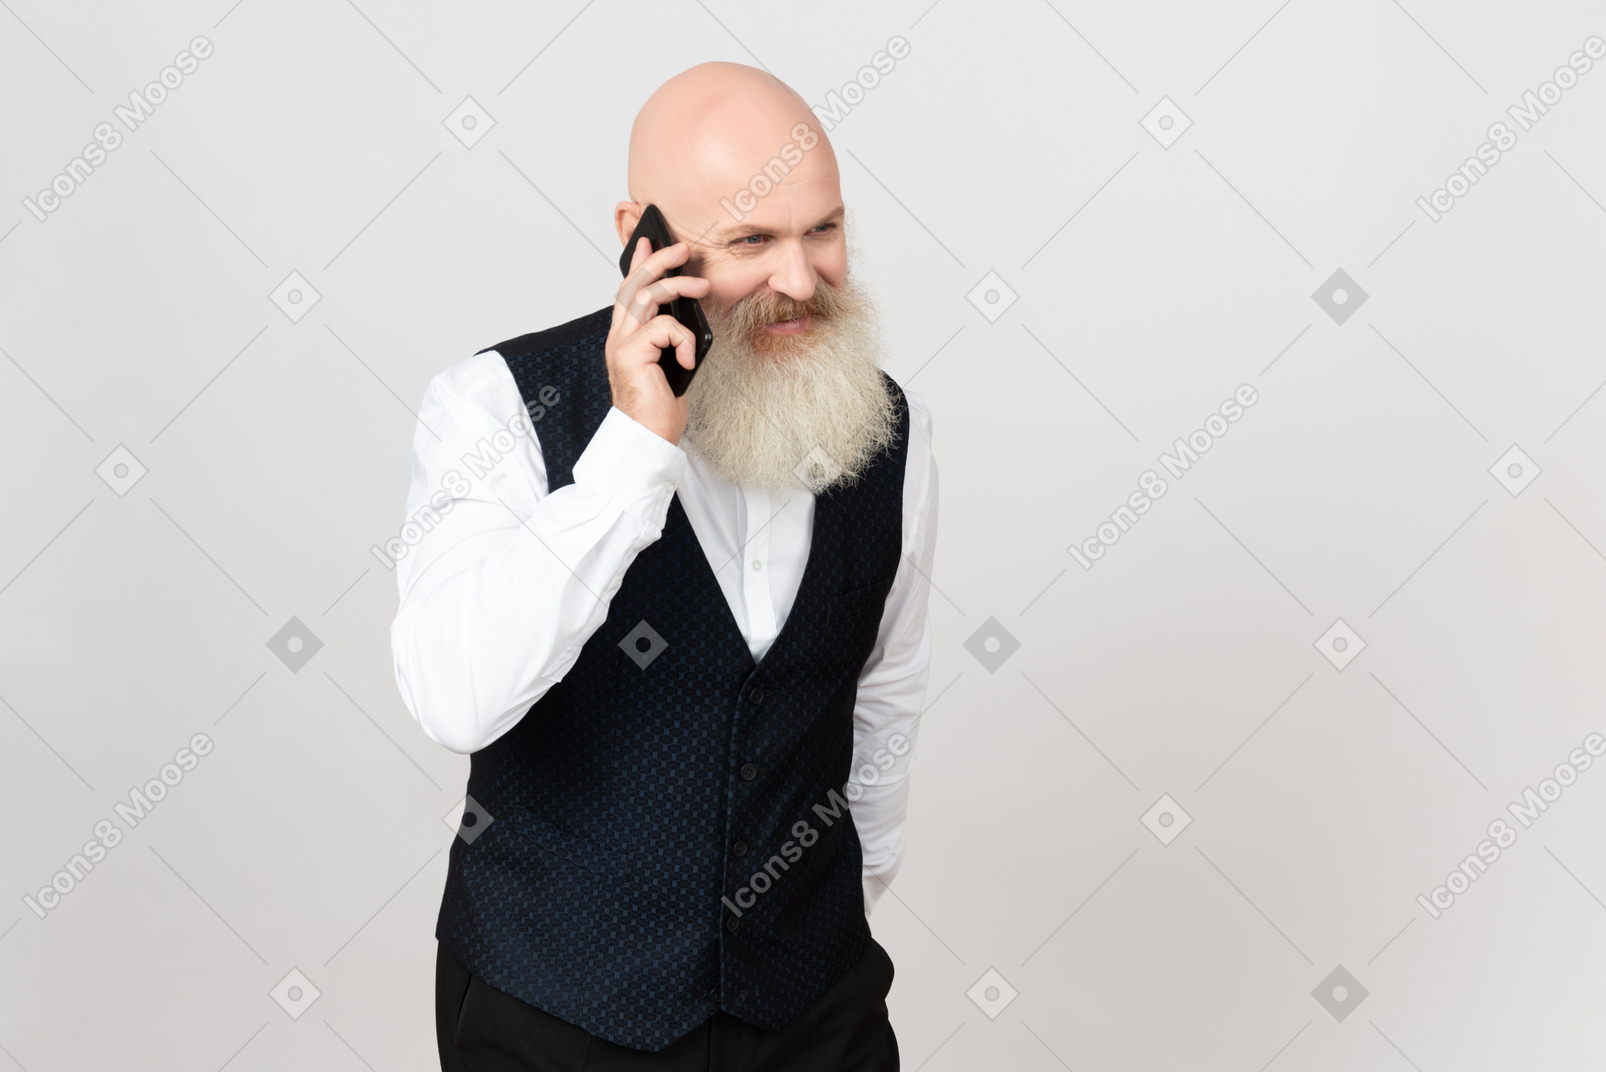 Aged man smiling and talking on the phone